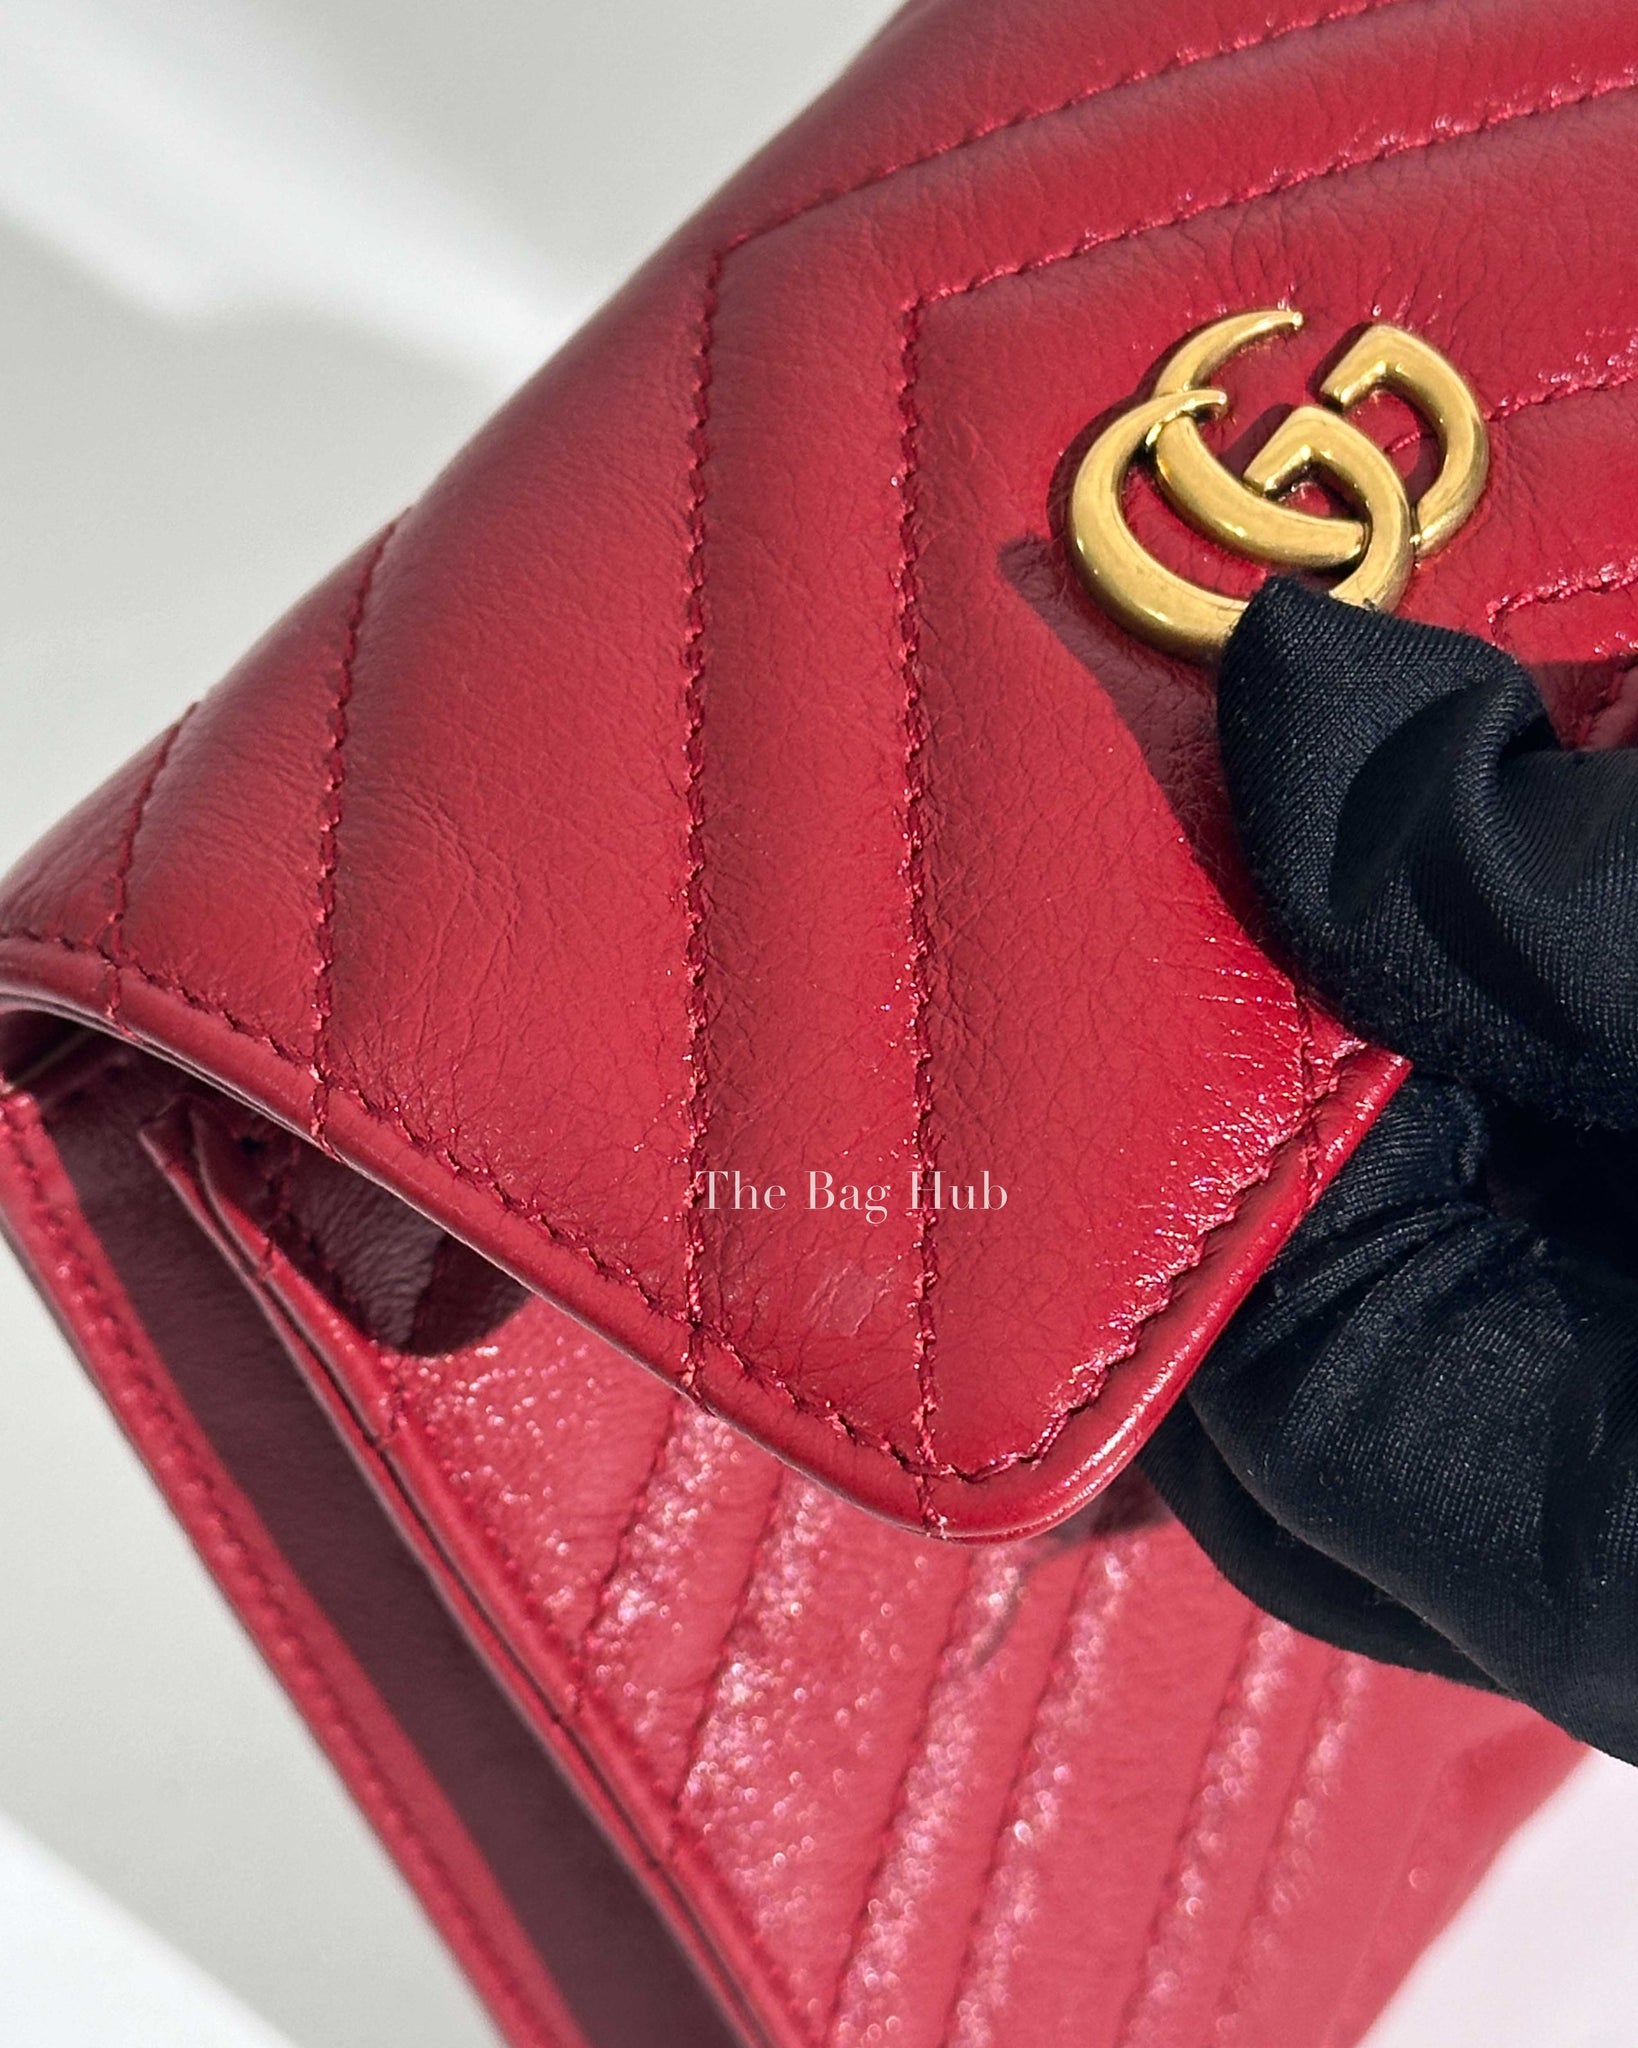 Gucci Red Matelasse Leather GG Marmont 2.0 Multi Belt Bag